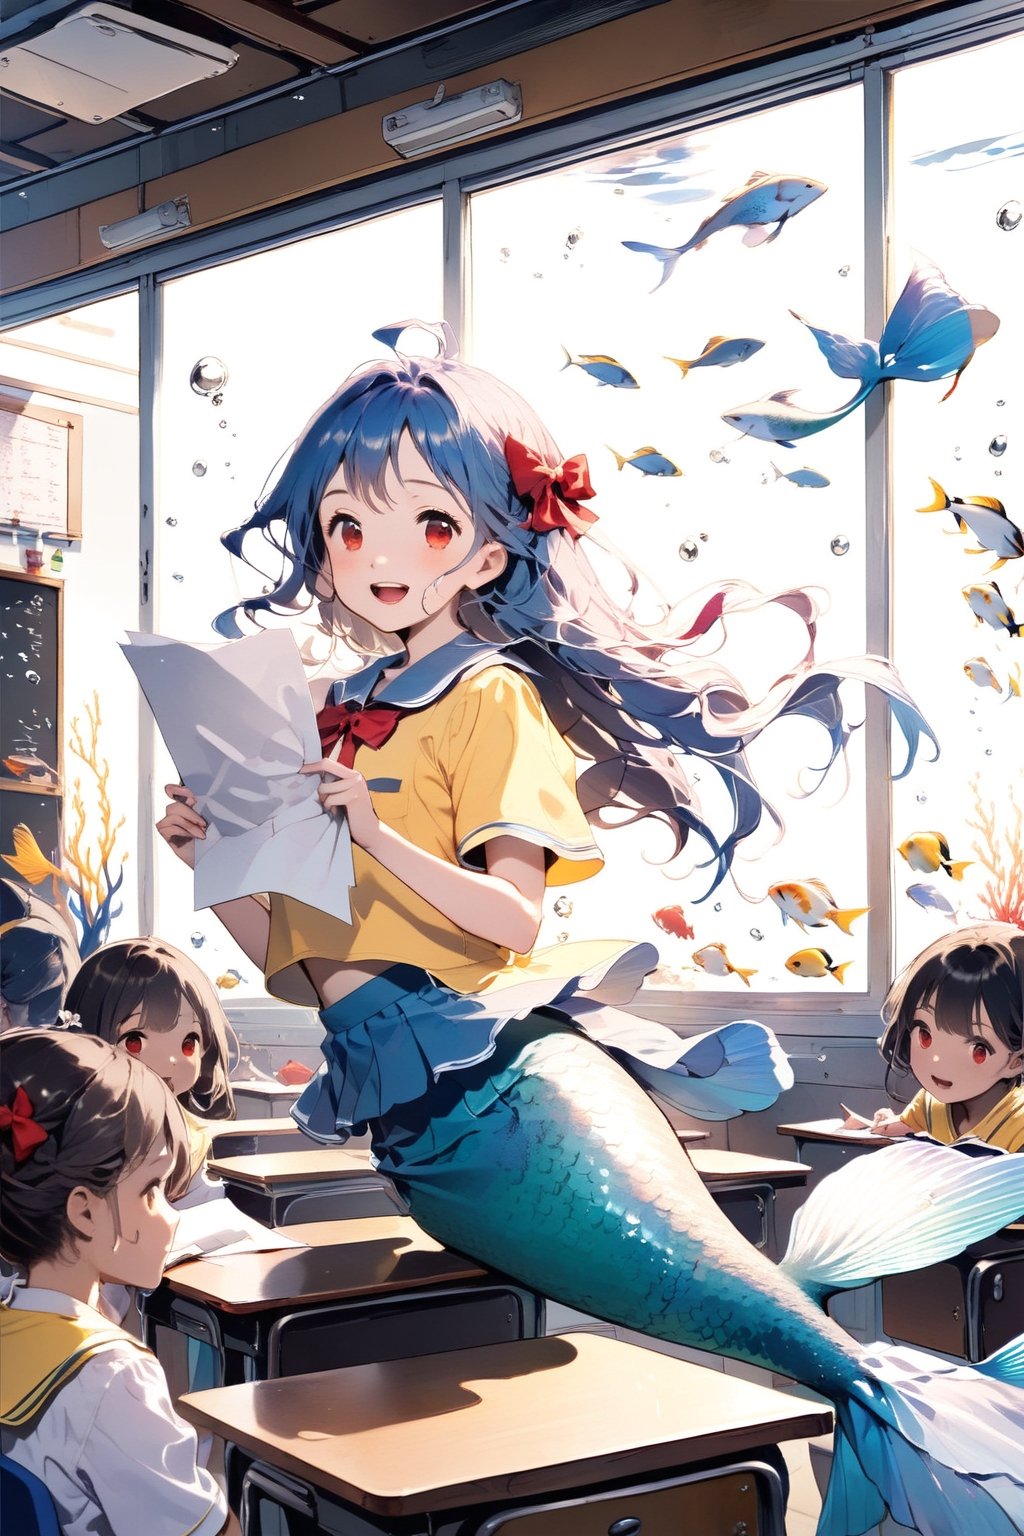 //quality, (masterpiece:1.4), (detailed), ((,best quality,)),//1girl,(mermaid:1.4),(loli:1.3), child,cute,//,(blue_hair:1.3),ahoge,floating_hair, detailed_eyes,(red eyes:1.2),//,bows,frilled,(yellow kindergarten uniform:1.3), yellow dress,//,smile,mouth_open,teeth,//,(holding paper:1.1),(facing_viewer, straight-on:1.4),//,(classroom:1.4), (back_against_wall:1.1), (blackboard:1.3),(indoors:1.3),detailed room, (underwater:1.2),(fish:1.2), bubbles,close_up,( comic of talking:1.4),mermaid audience